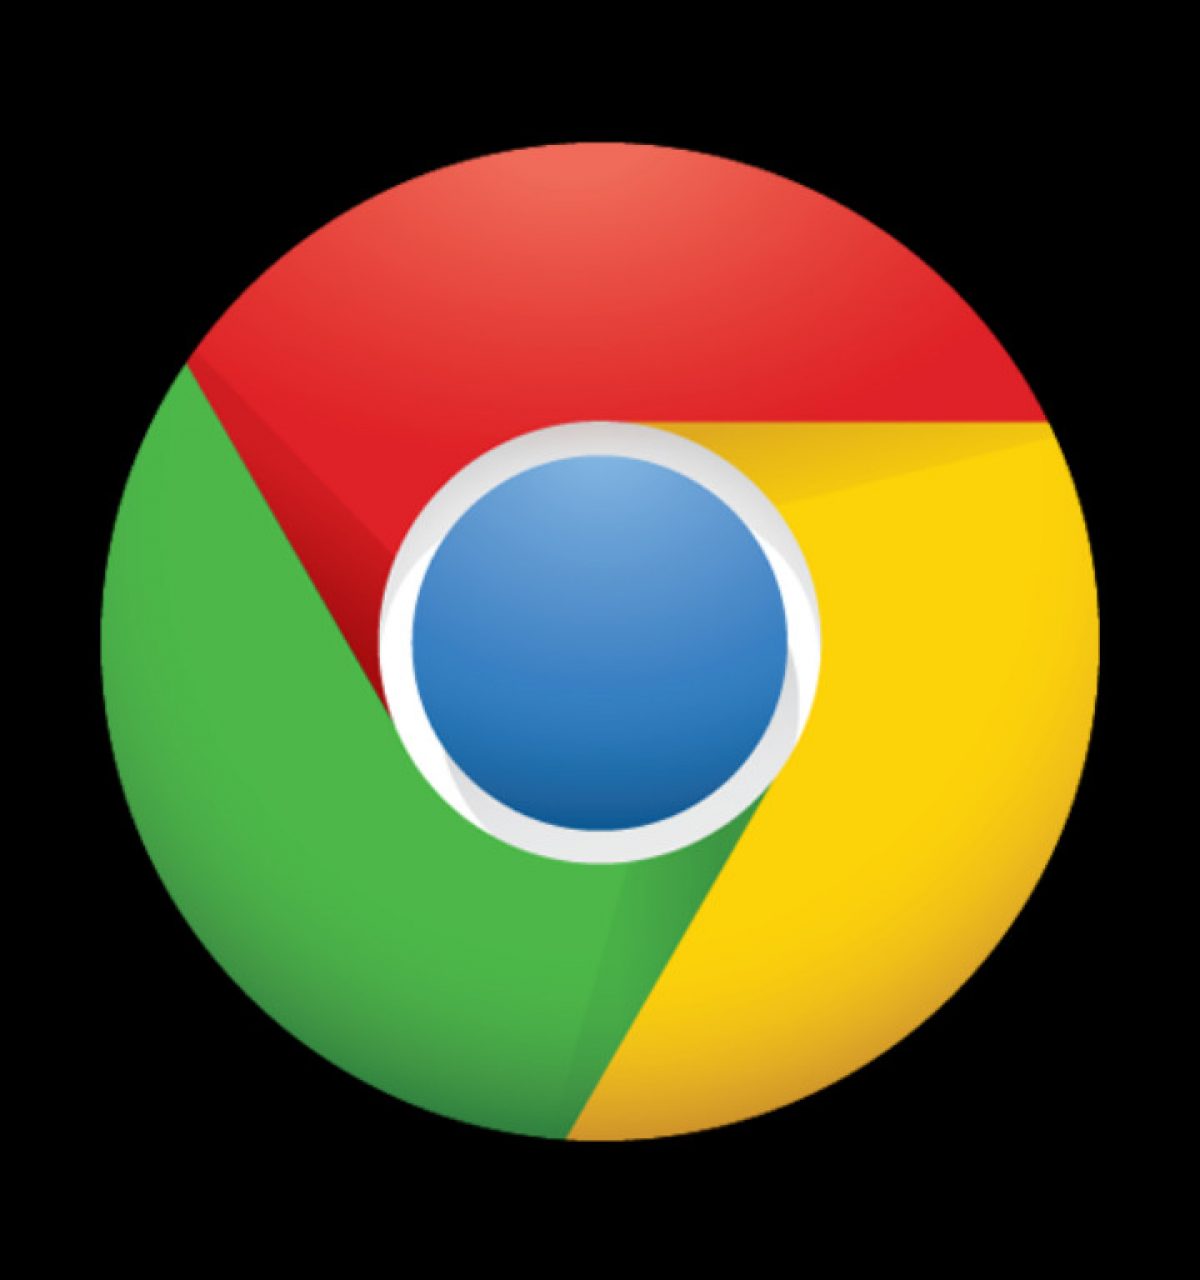 Chrome for Android Now Works on Intel x86 Devices